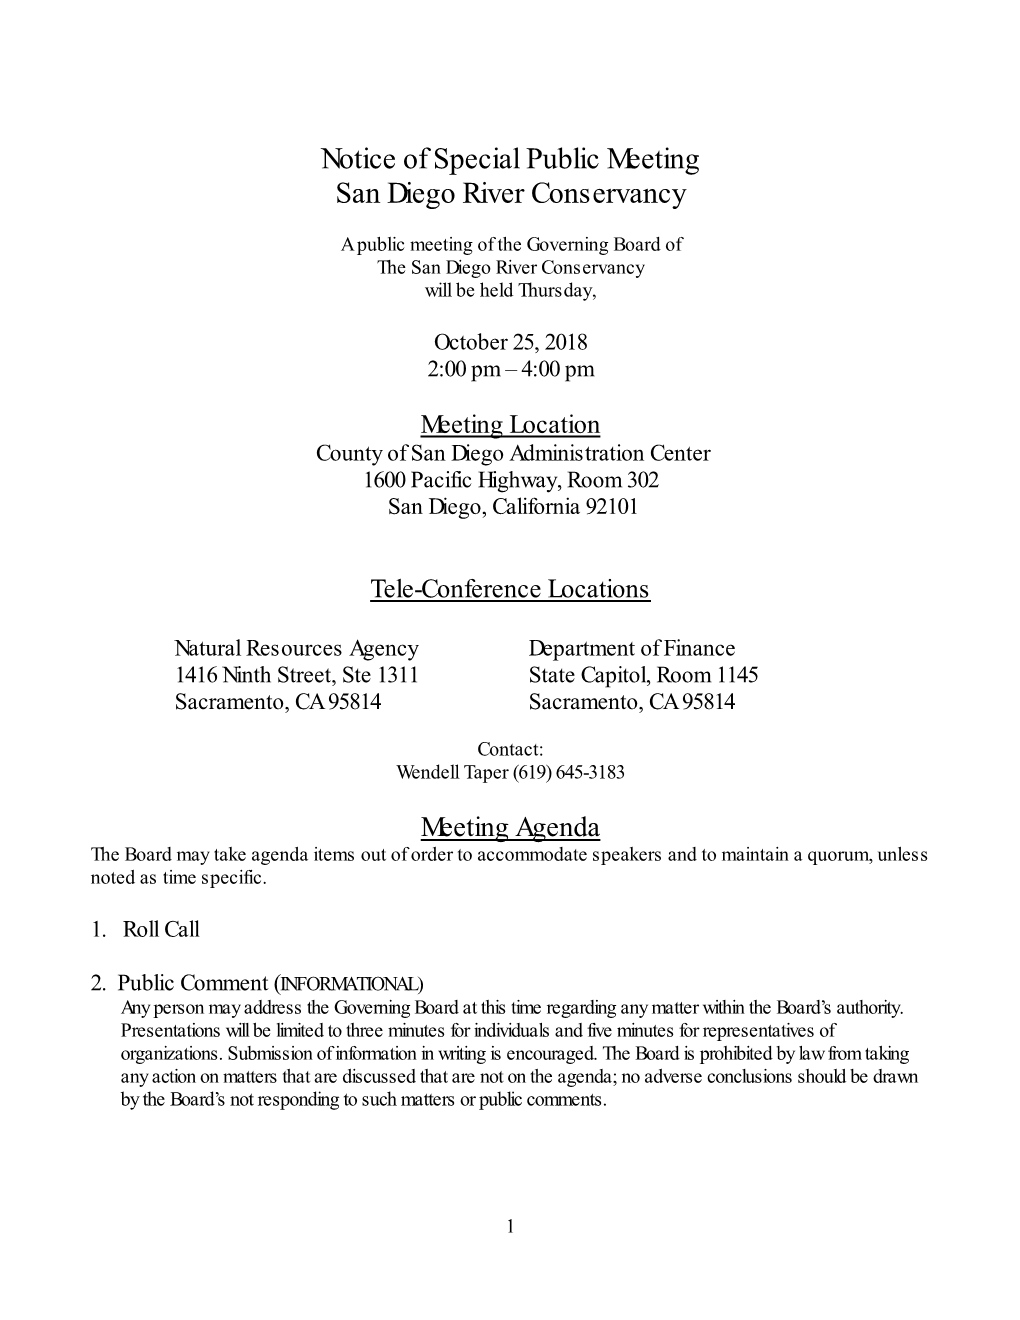 Notice of Special Public Meeting San Diego River Conservancy